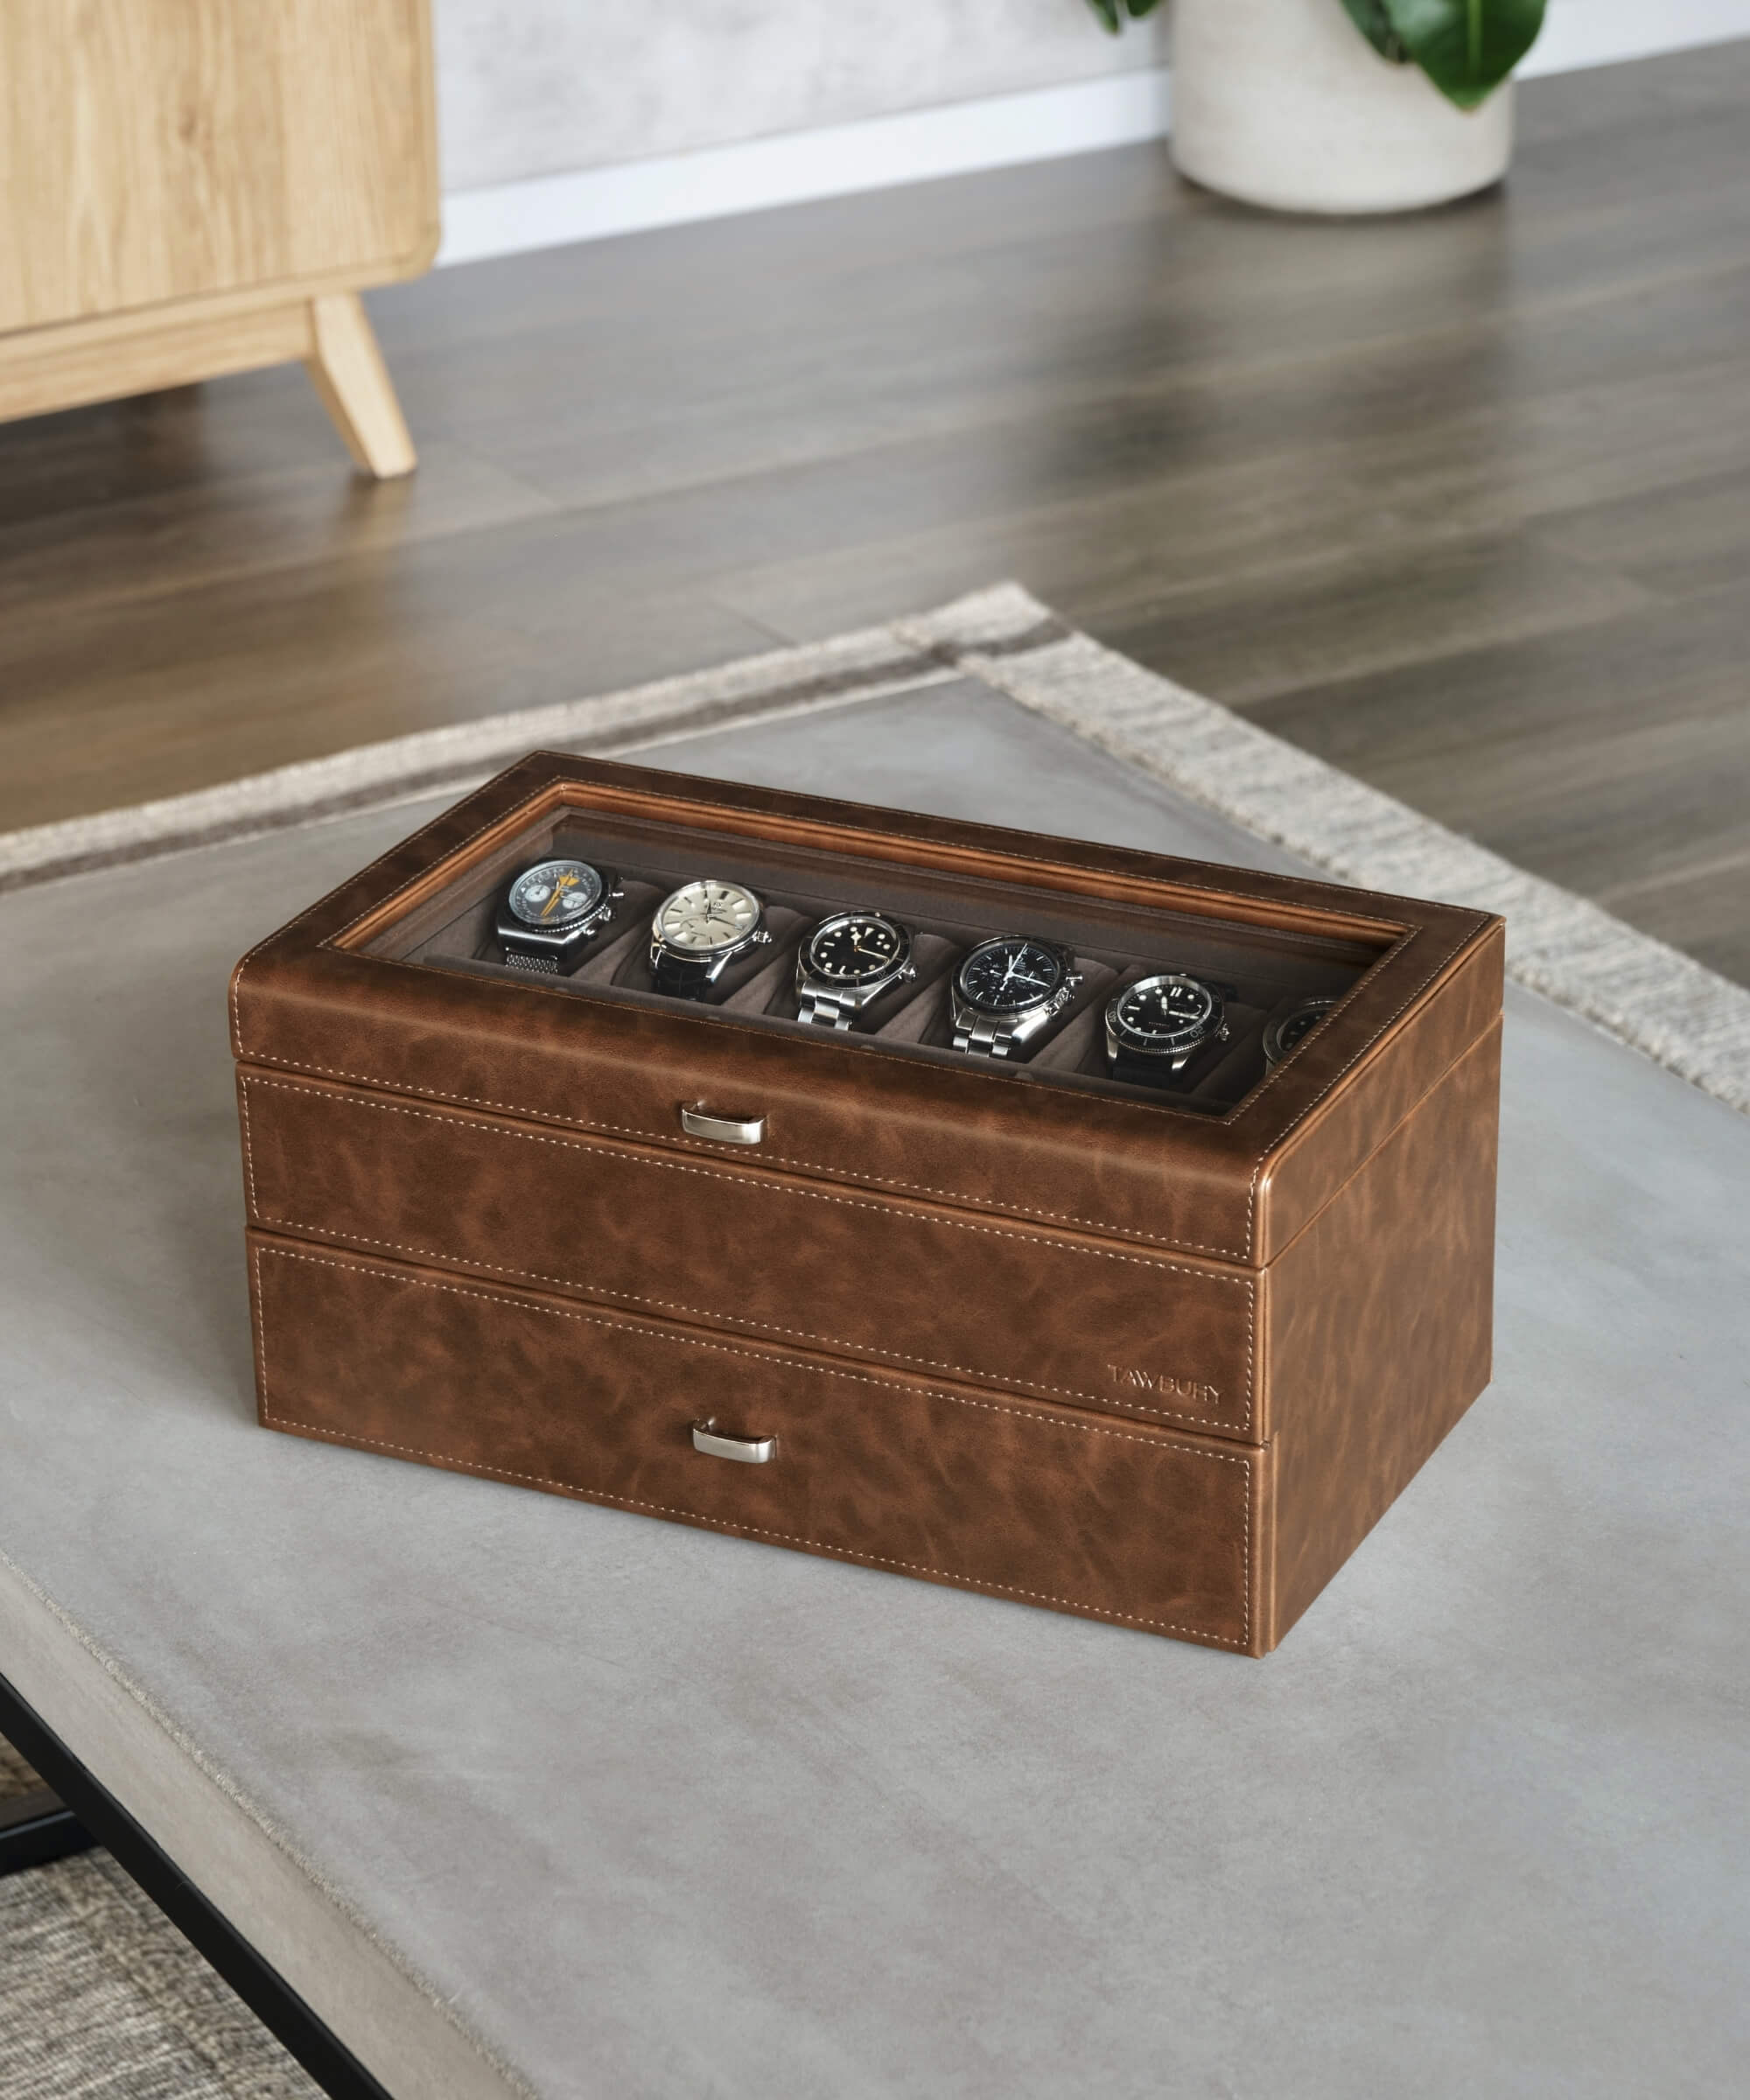 A TAWBURY Bayswater 24 Slot Watch Box with Drawer - Brown, perfect for watch enthusiasts, neatly organizes timepieces.